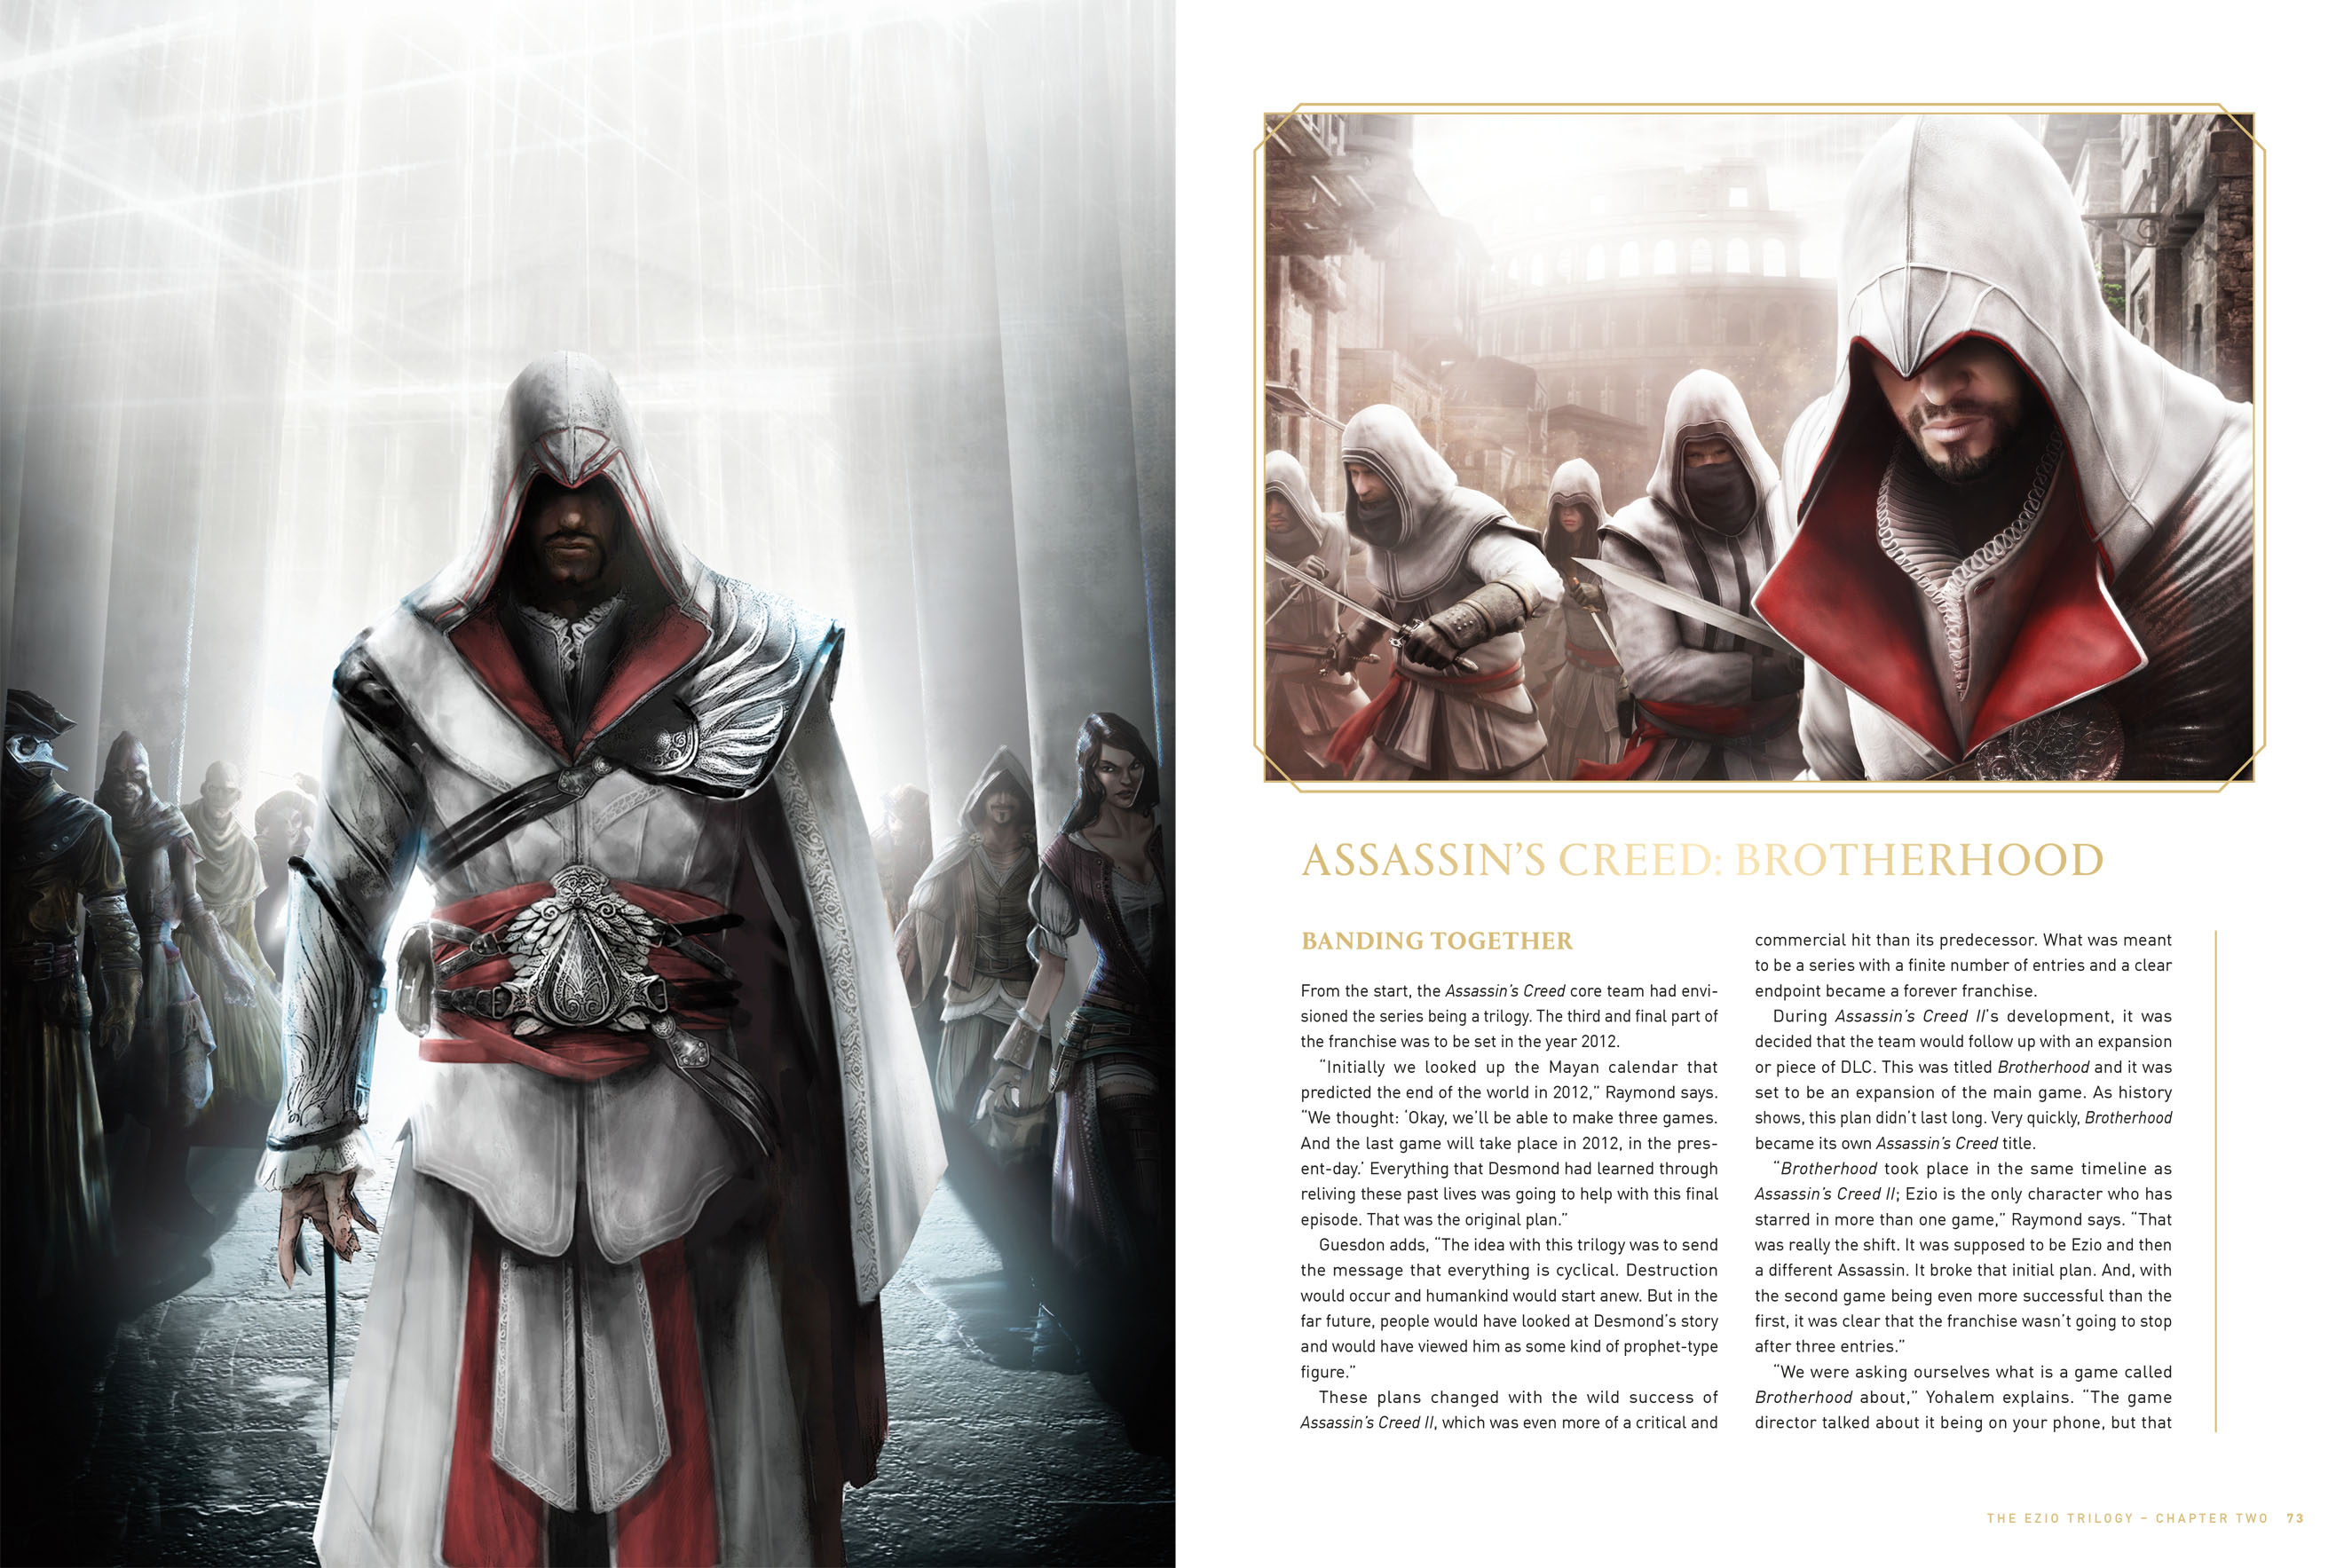 Is Ubisoft Teasing an Assassin's Creed 1 Remake for Its 15th Anniversary?